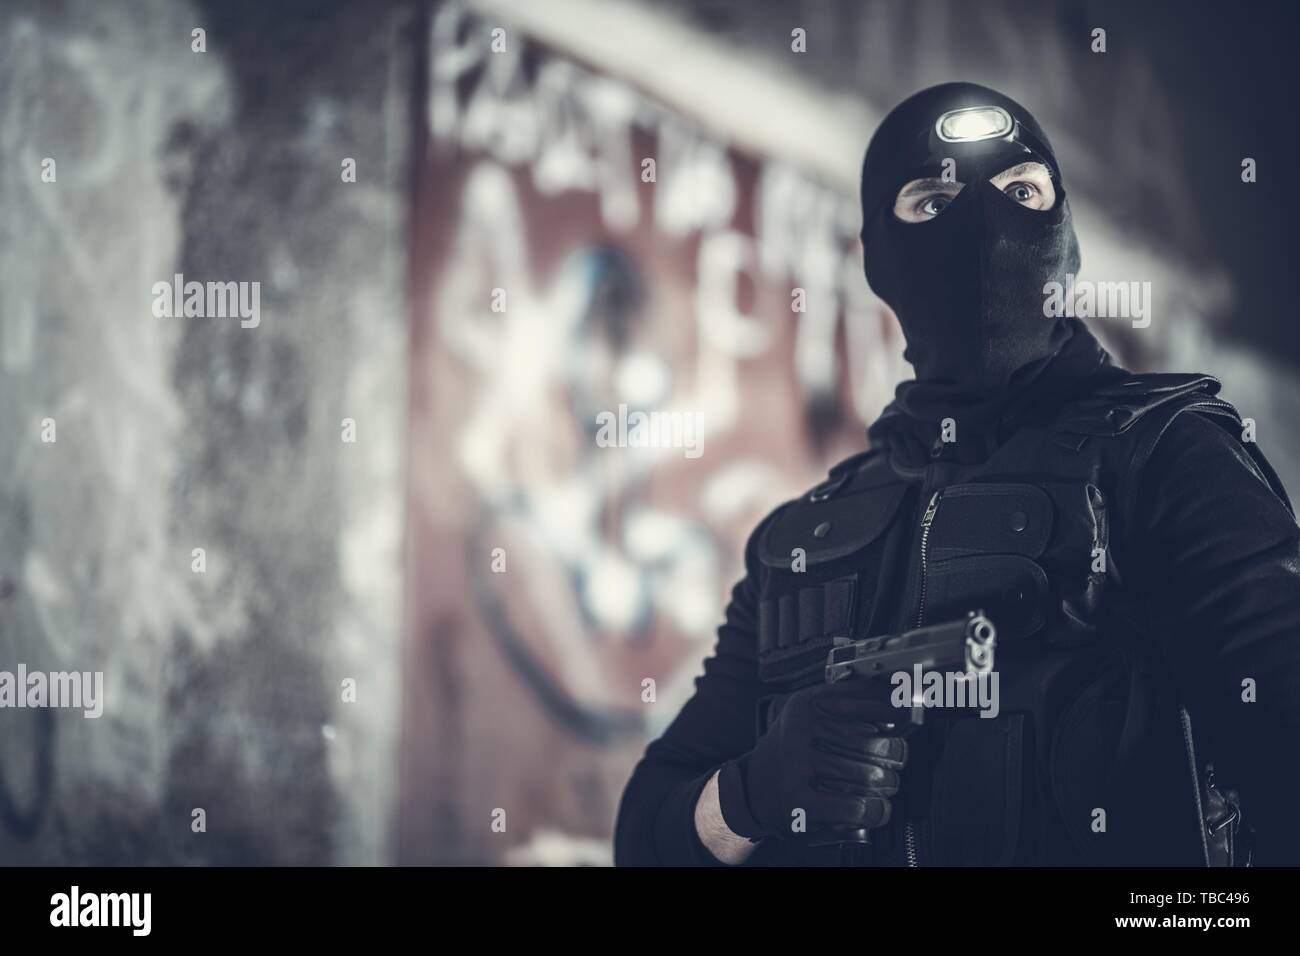 Counter Terrorist Portrait. Men Wearing Mask and Tactical West. Special Forces Soldier. Stock Photo